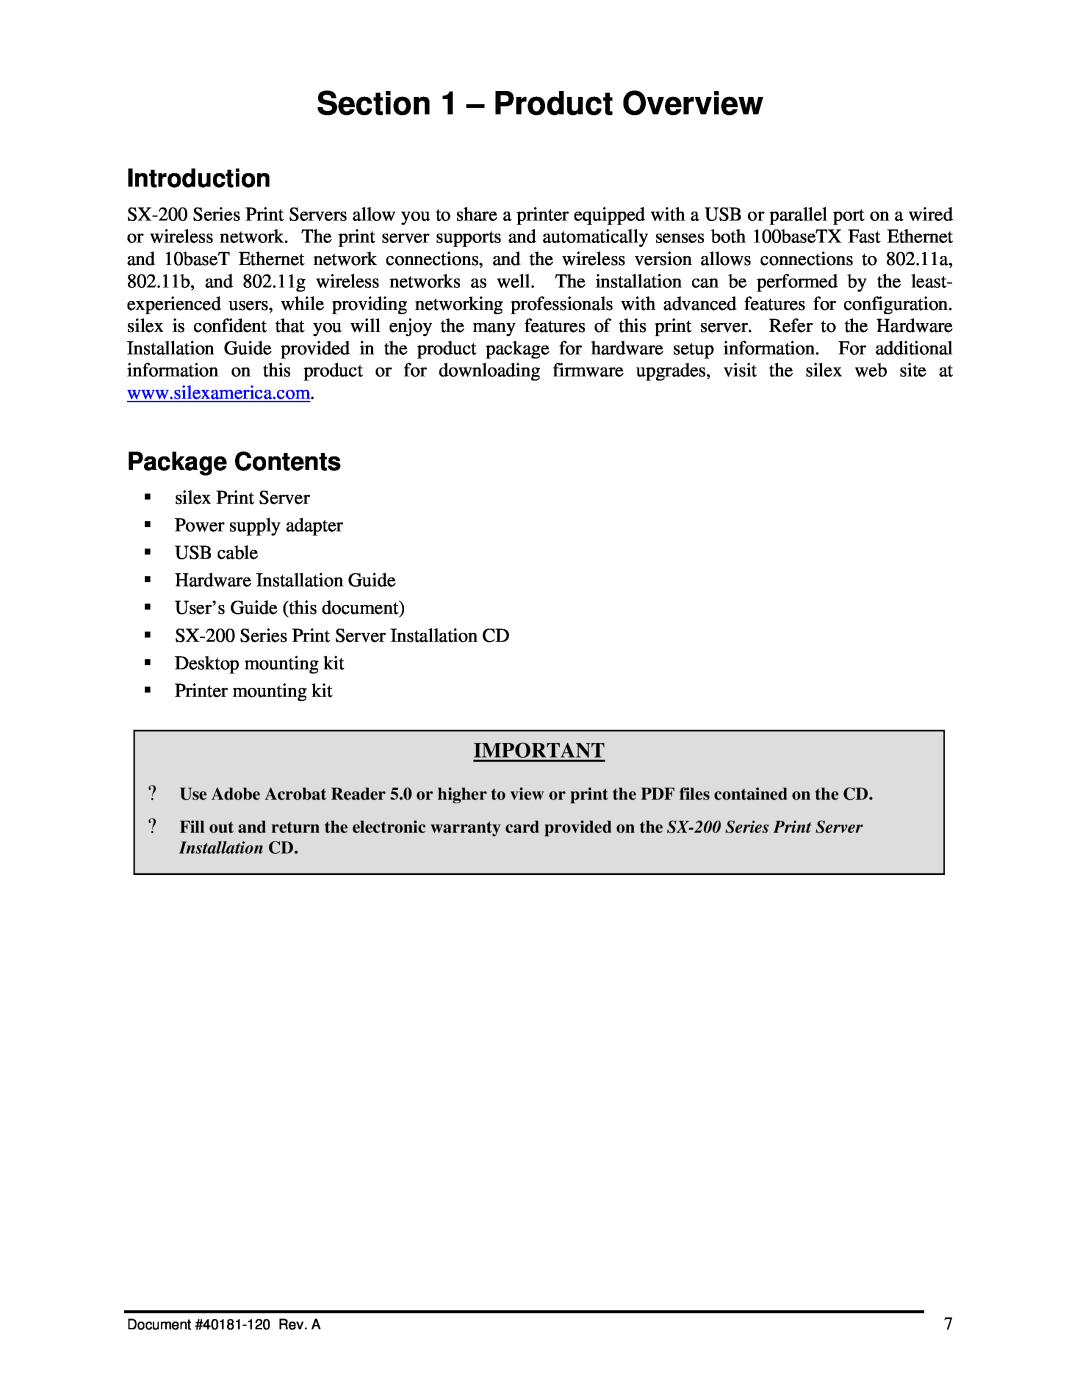 Silex technology SX-200 user manual Product Overview, Introduction, Package Contents 